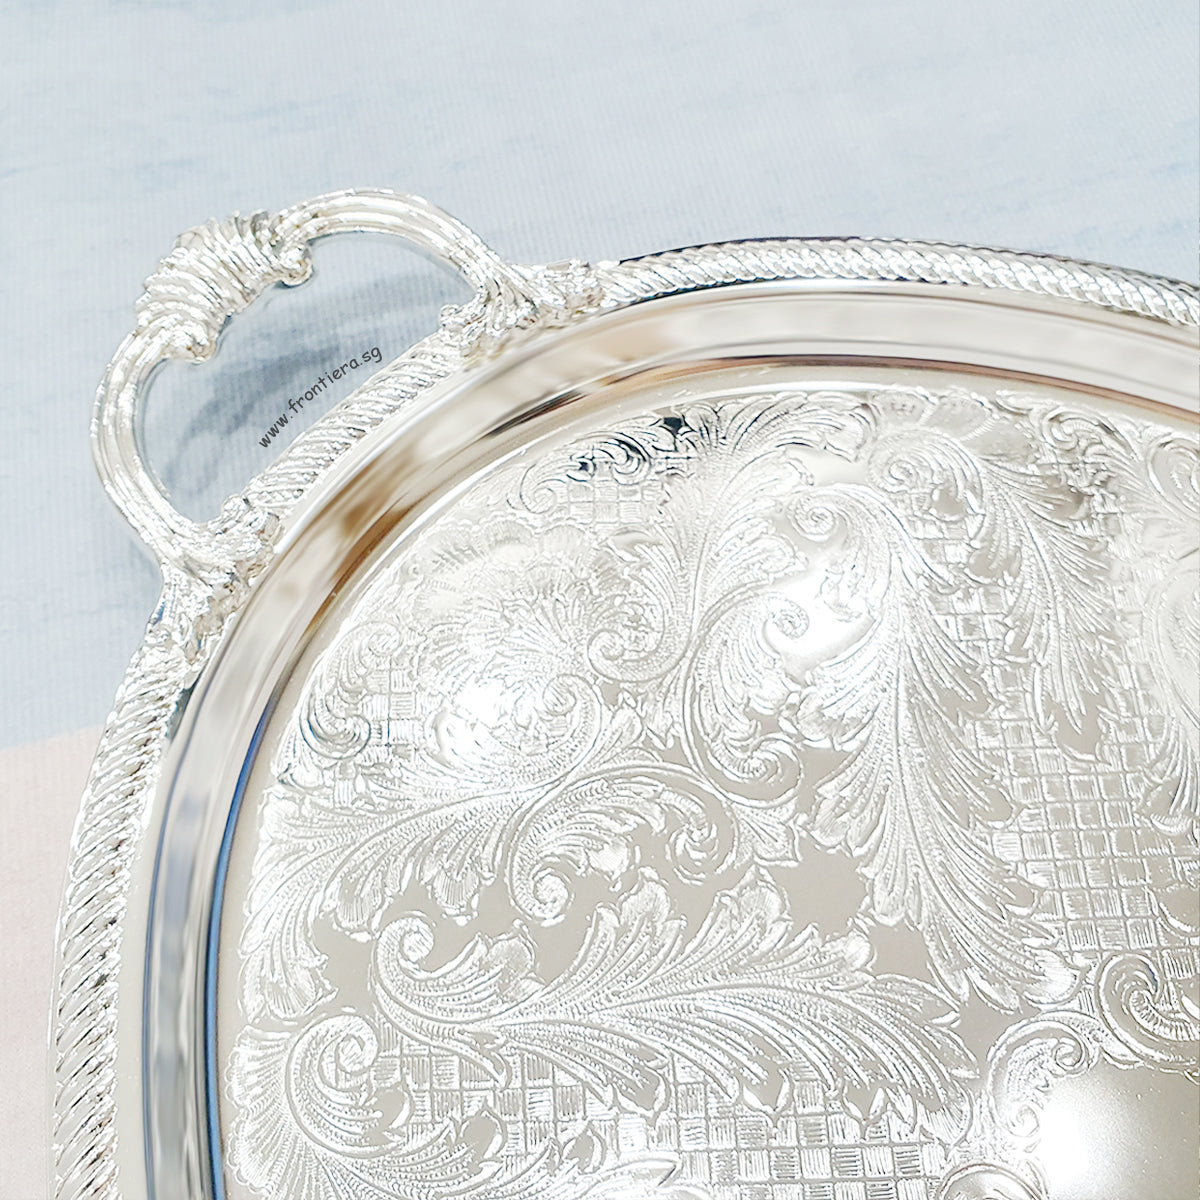 [England Silverware] Shallow Large Oval Serving Tray with Handle 505mm